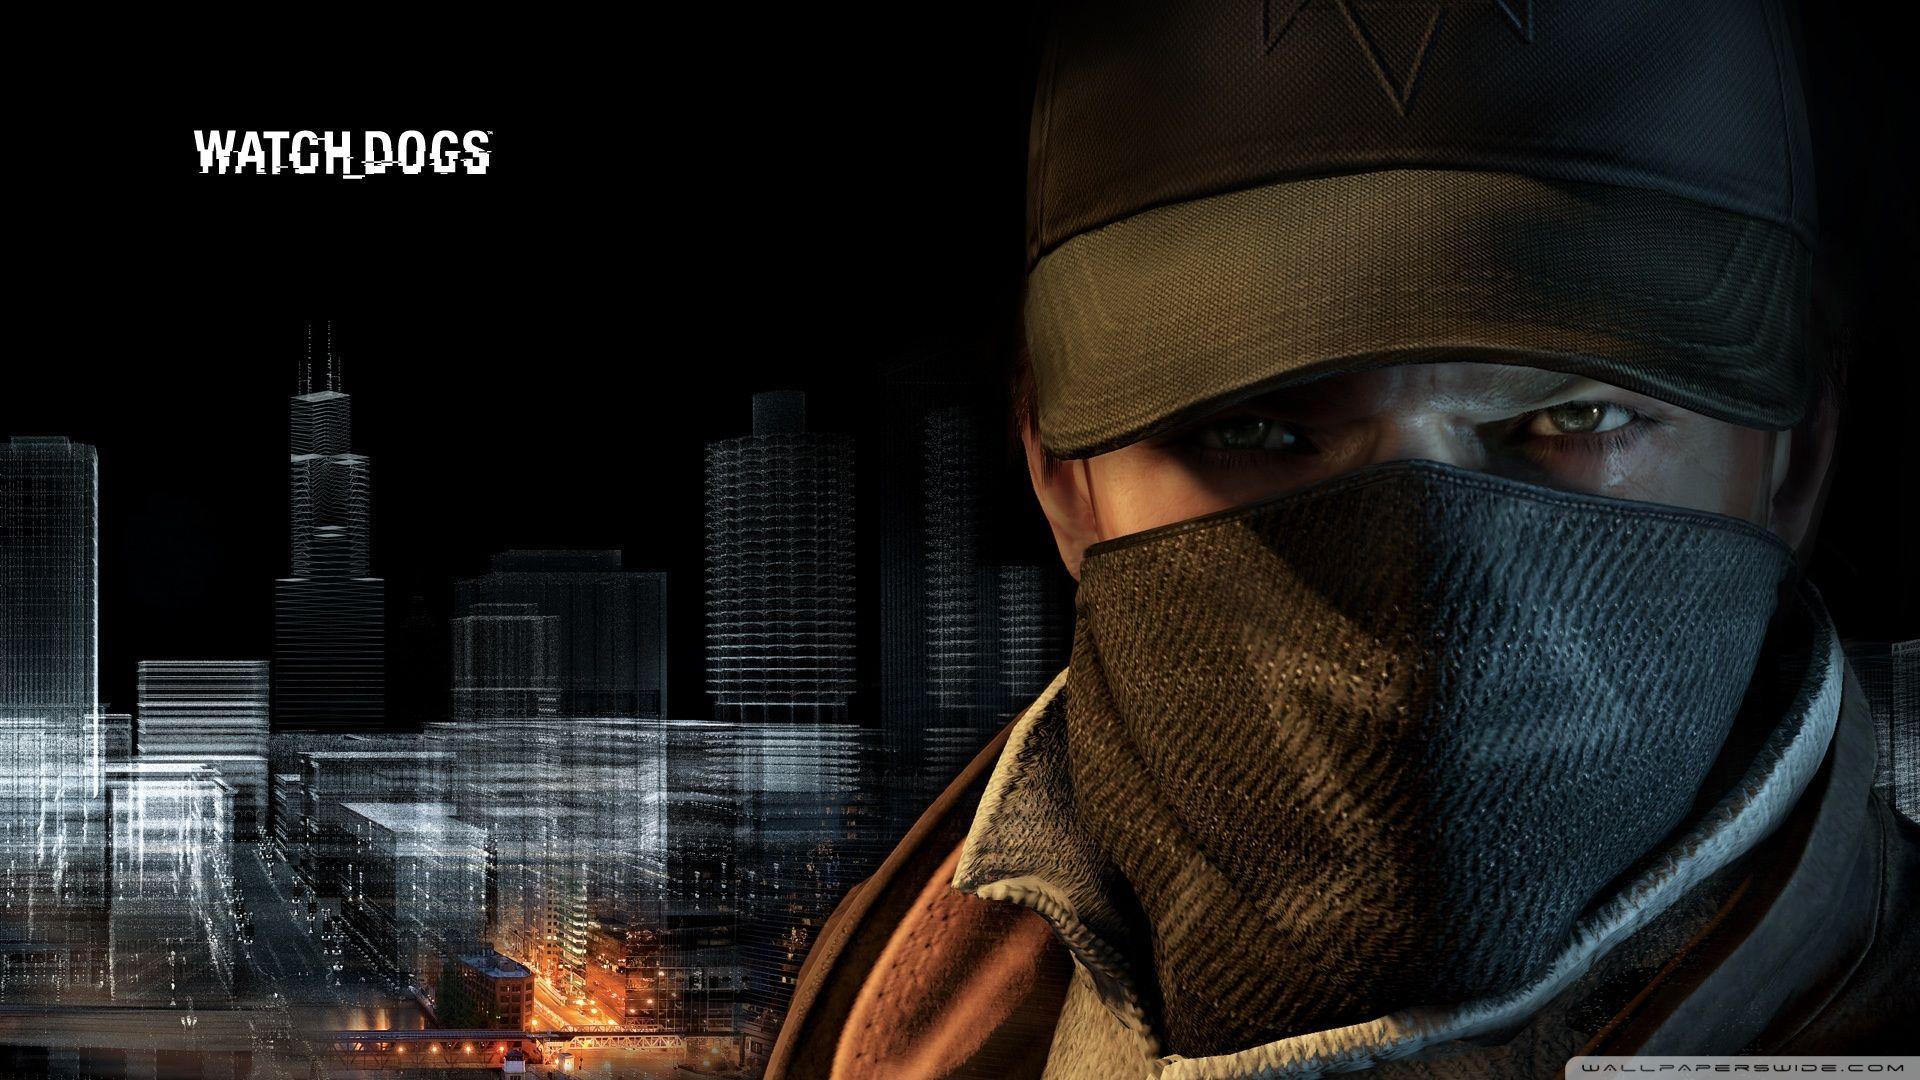  WATCH DOGS  Wallpapers  Wallpaper  Cave